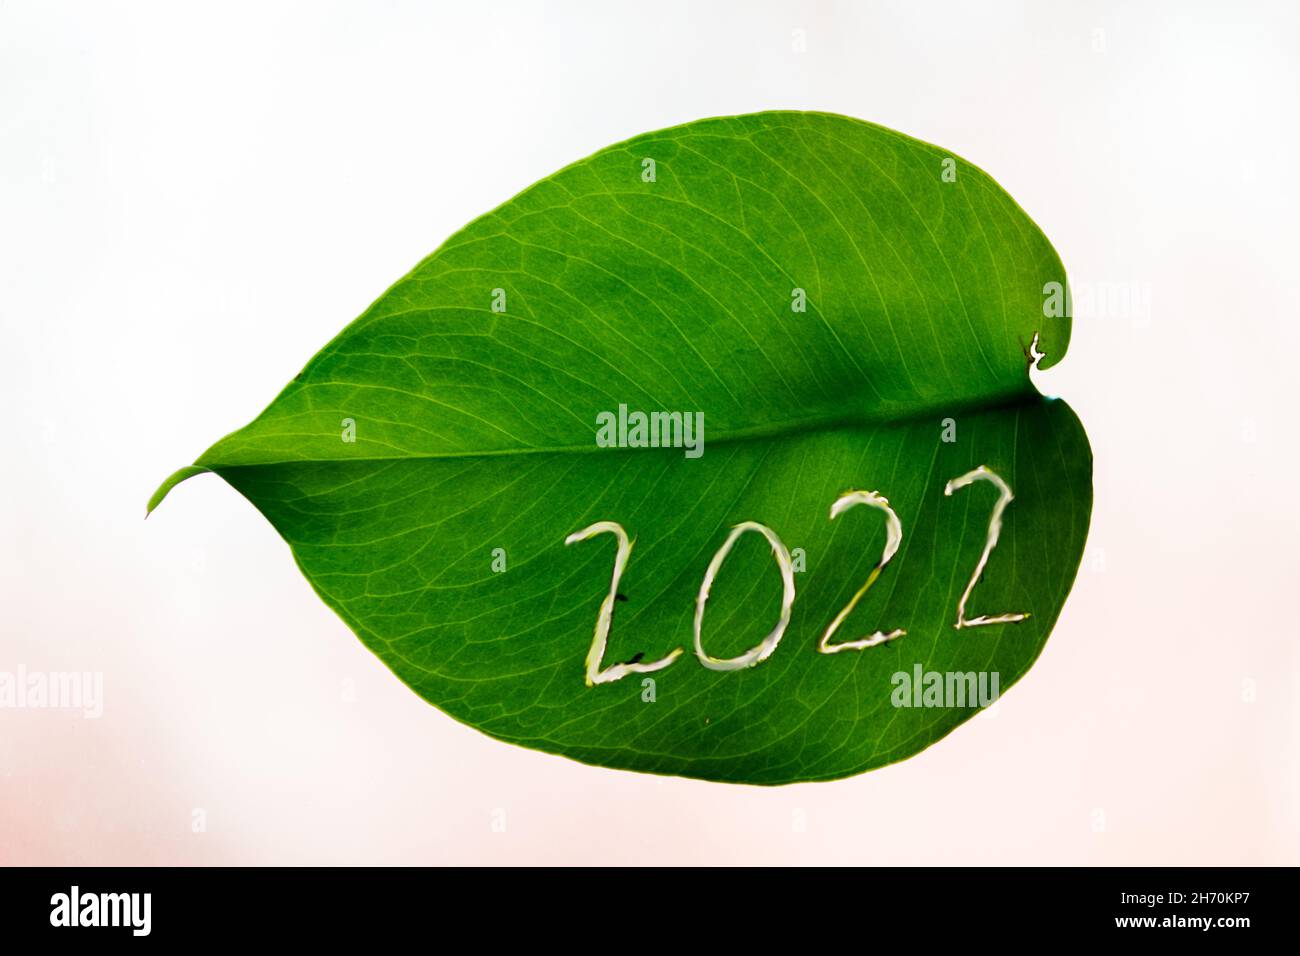 Number 2022. New Year. The number 2022 is carved into a green leaf. Stock Photo